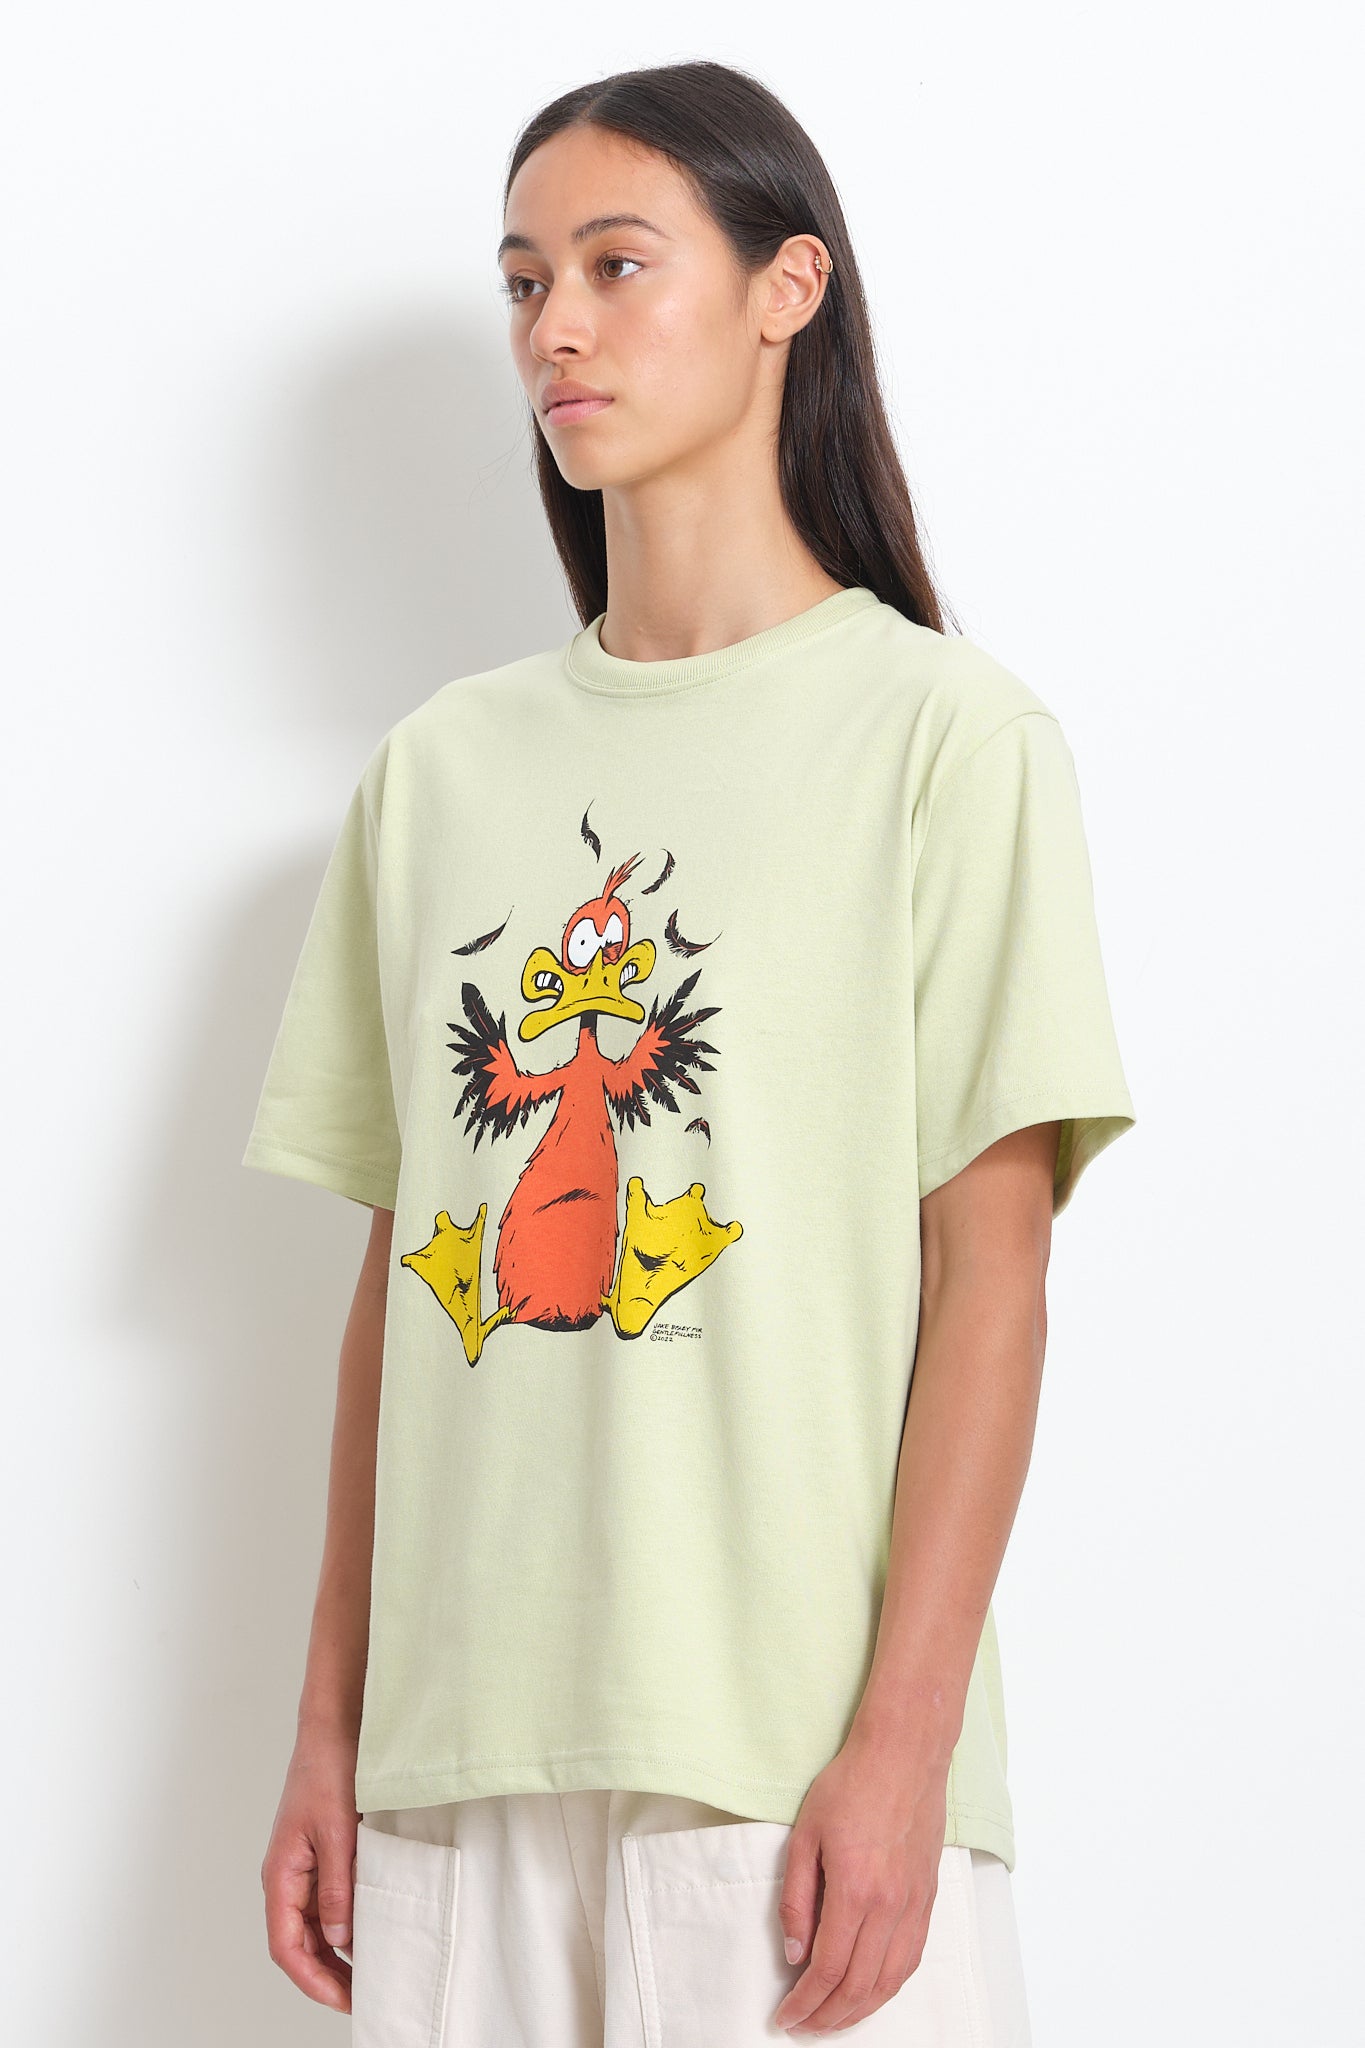 Recycled Cotton SS Tee - – Duckman Pistachio Story